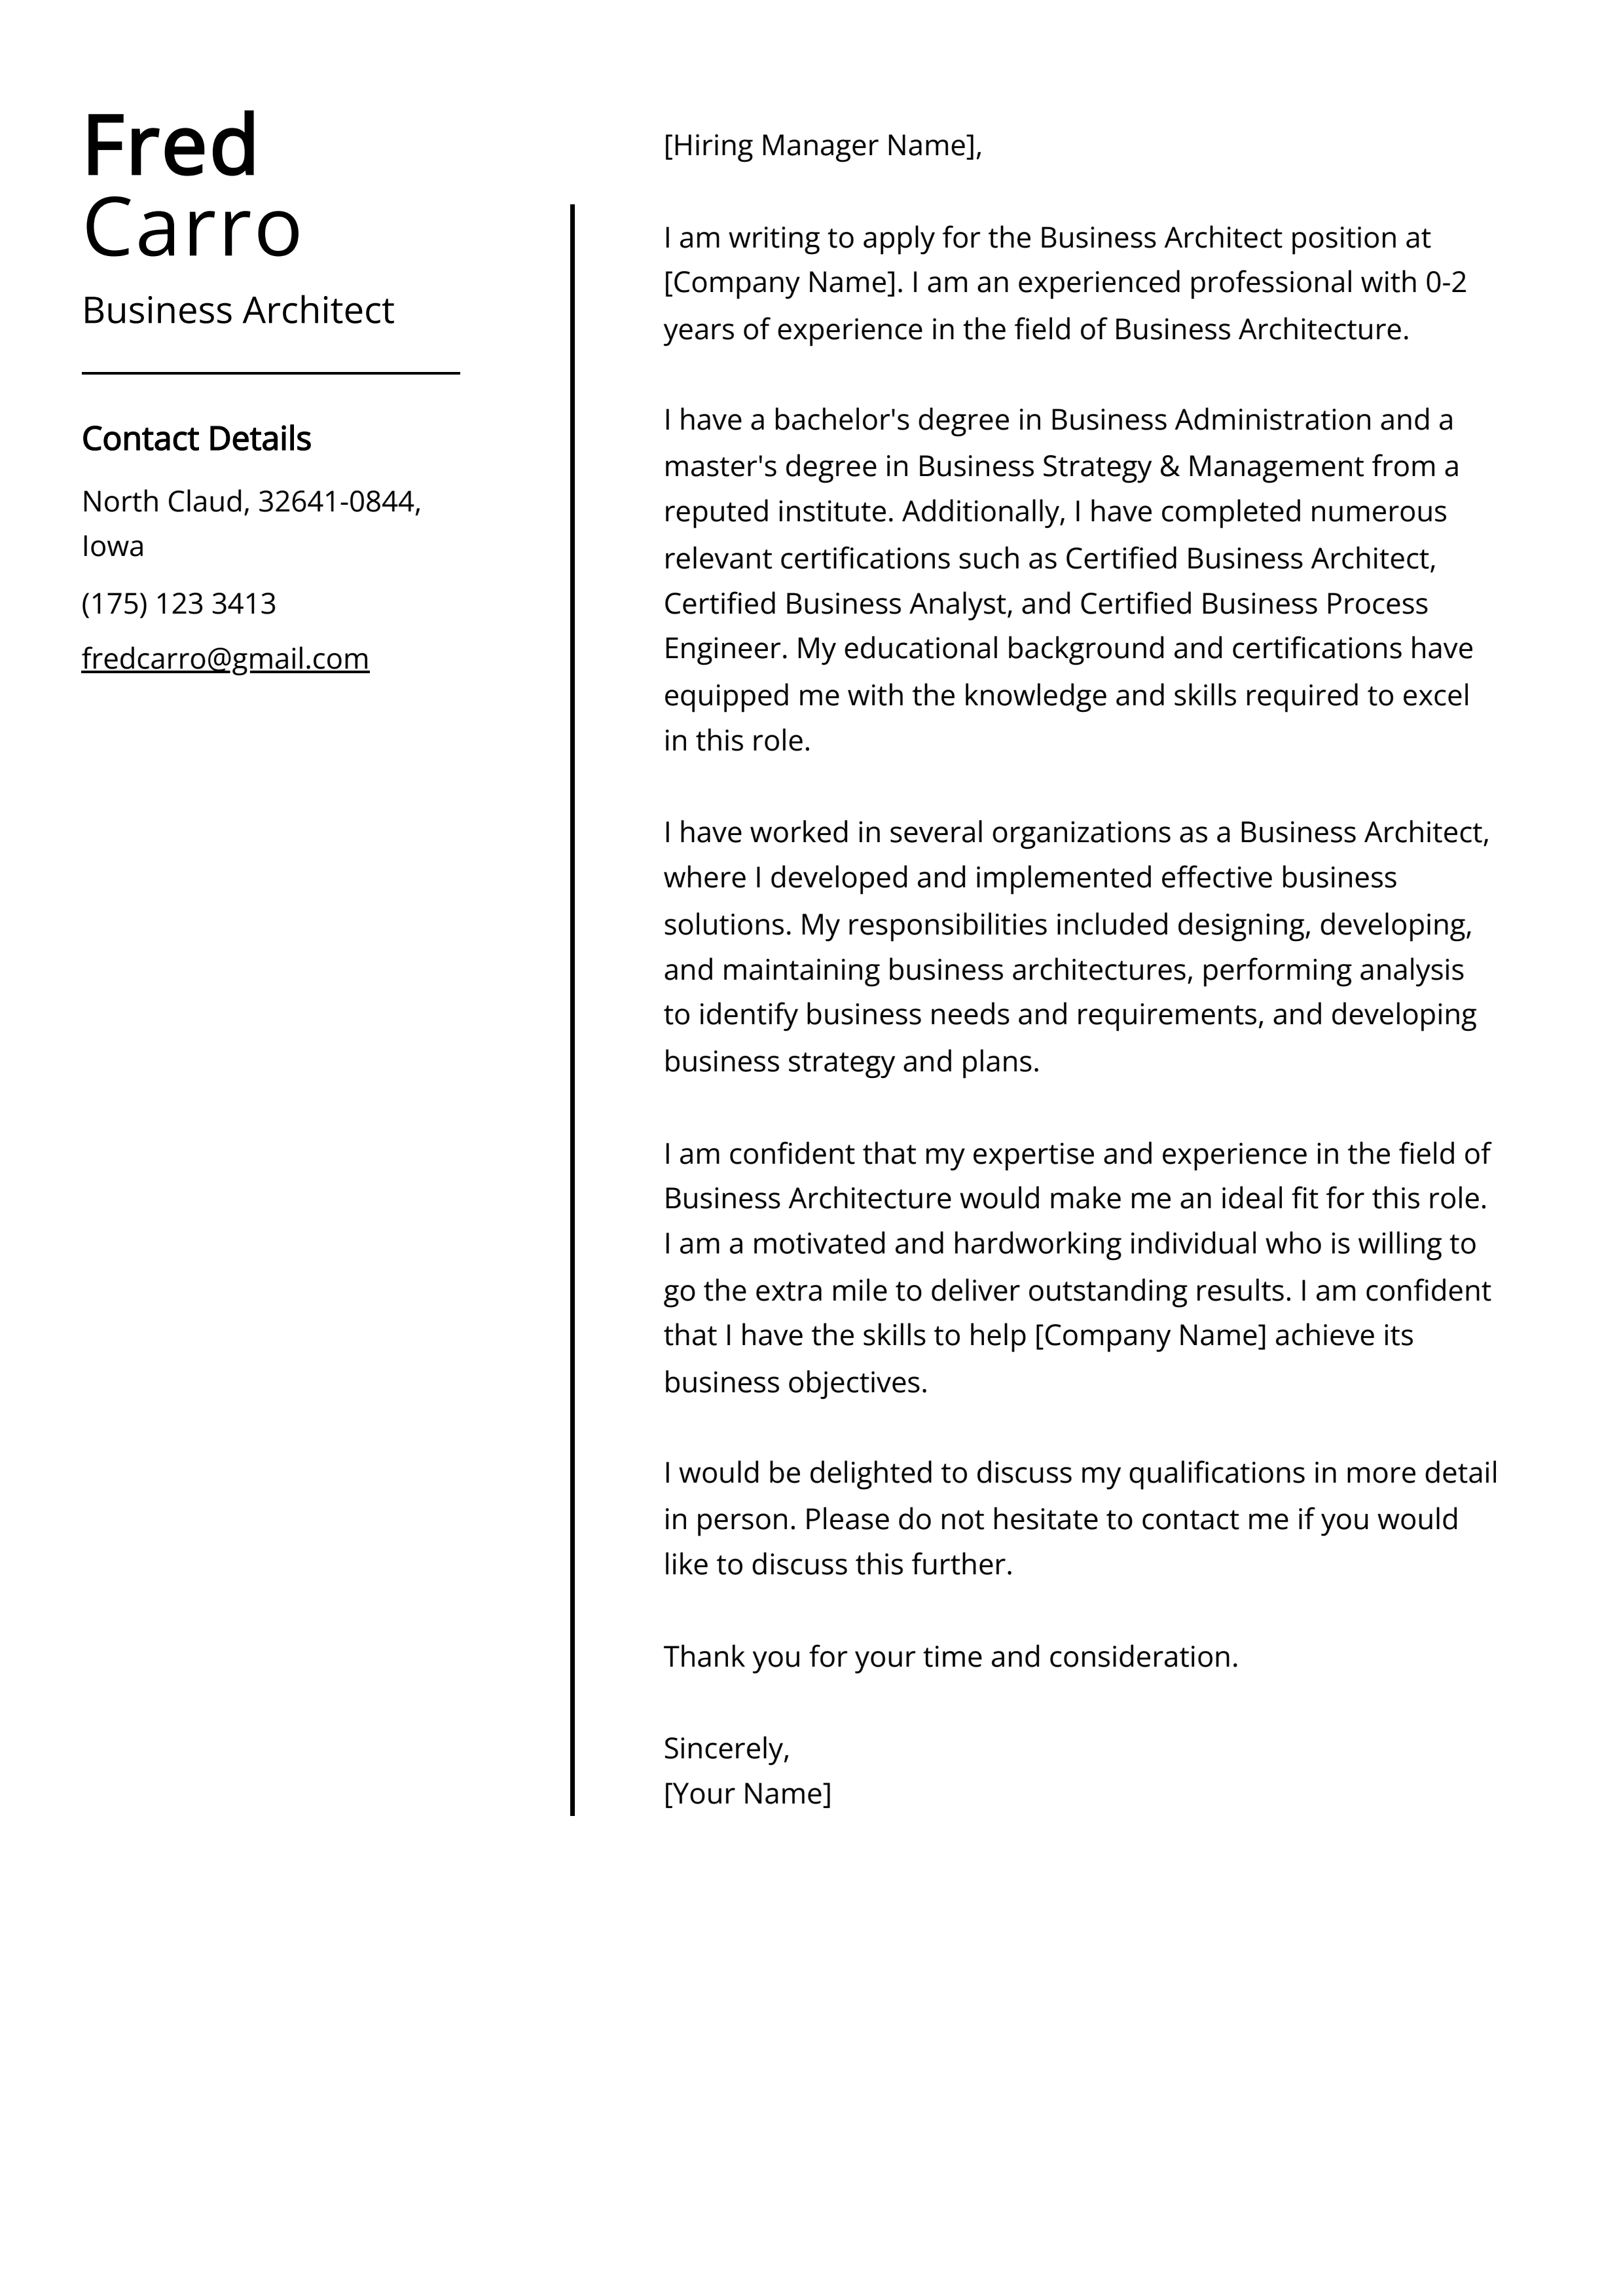 Business Architect Cover Letter Example